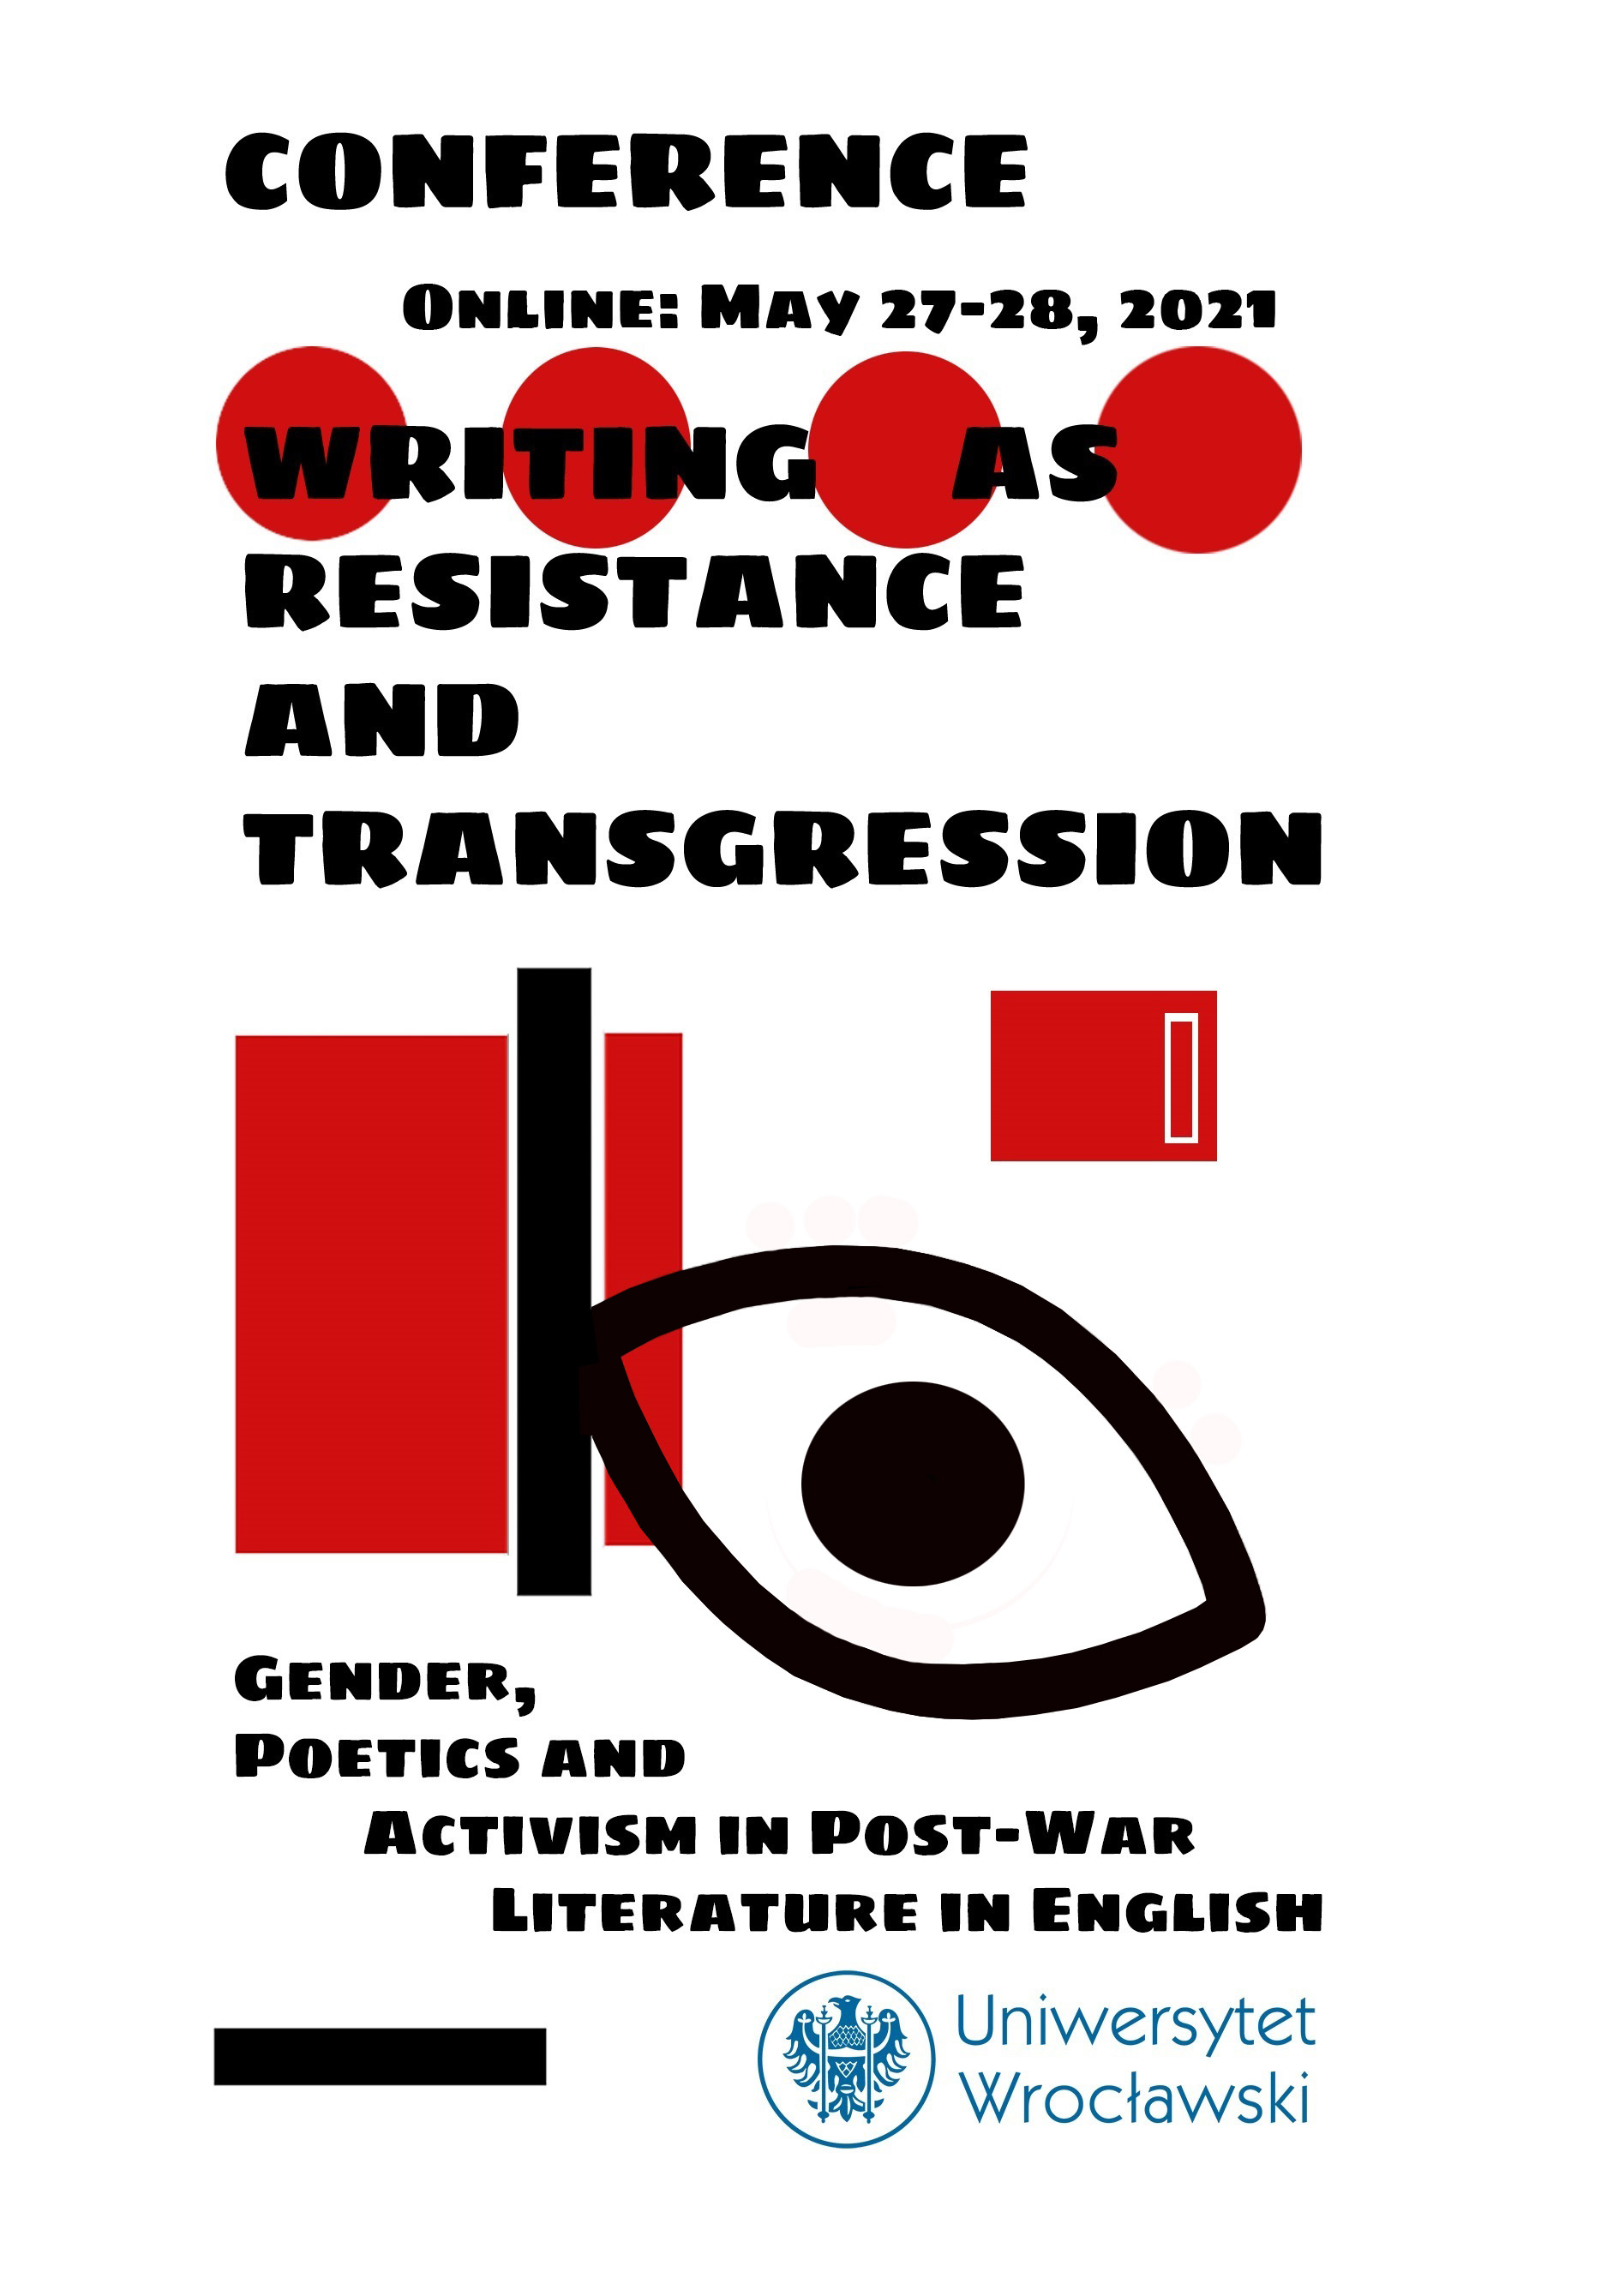 Allegato post-531209-Poster_WritingAsResistance_UWr_IFA_Conference.jpg